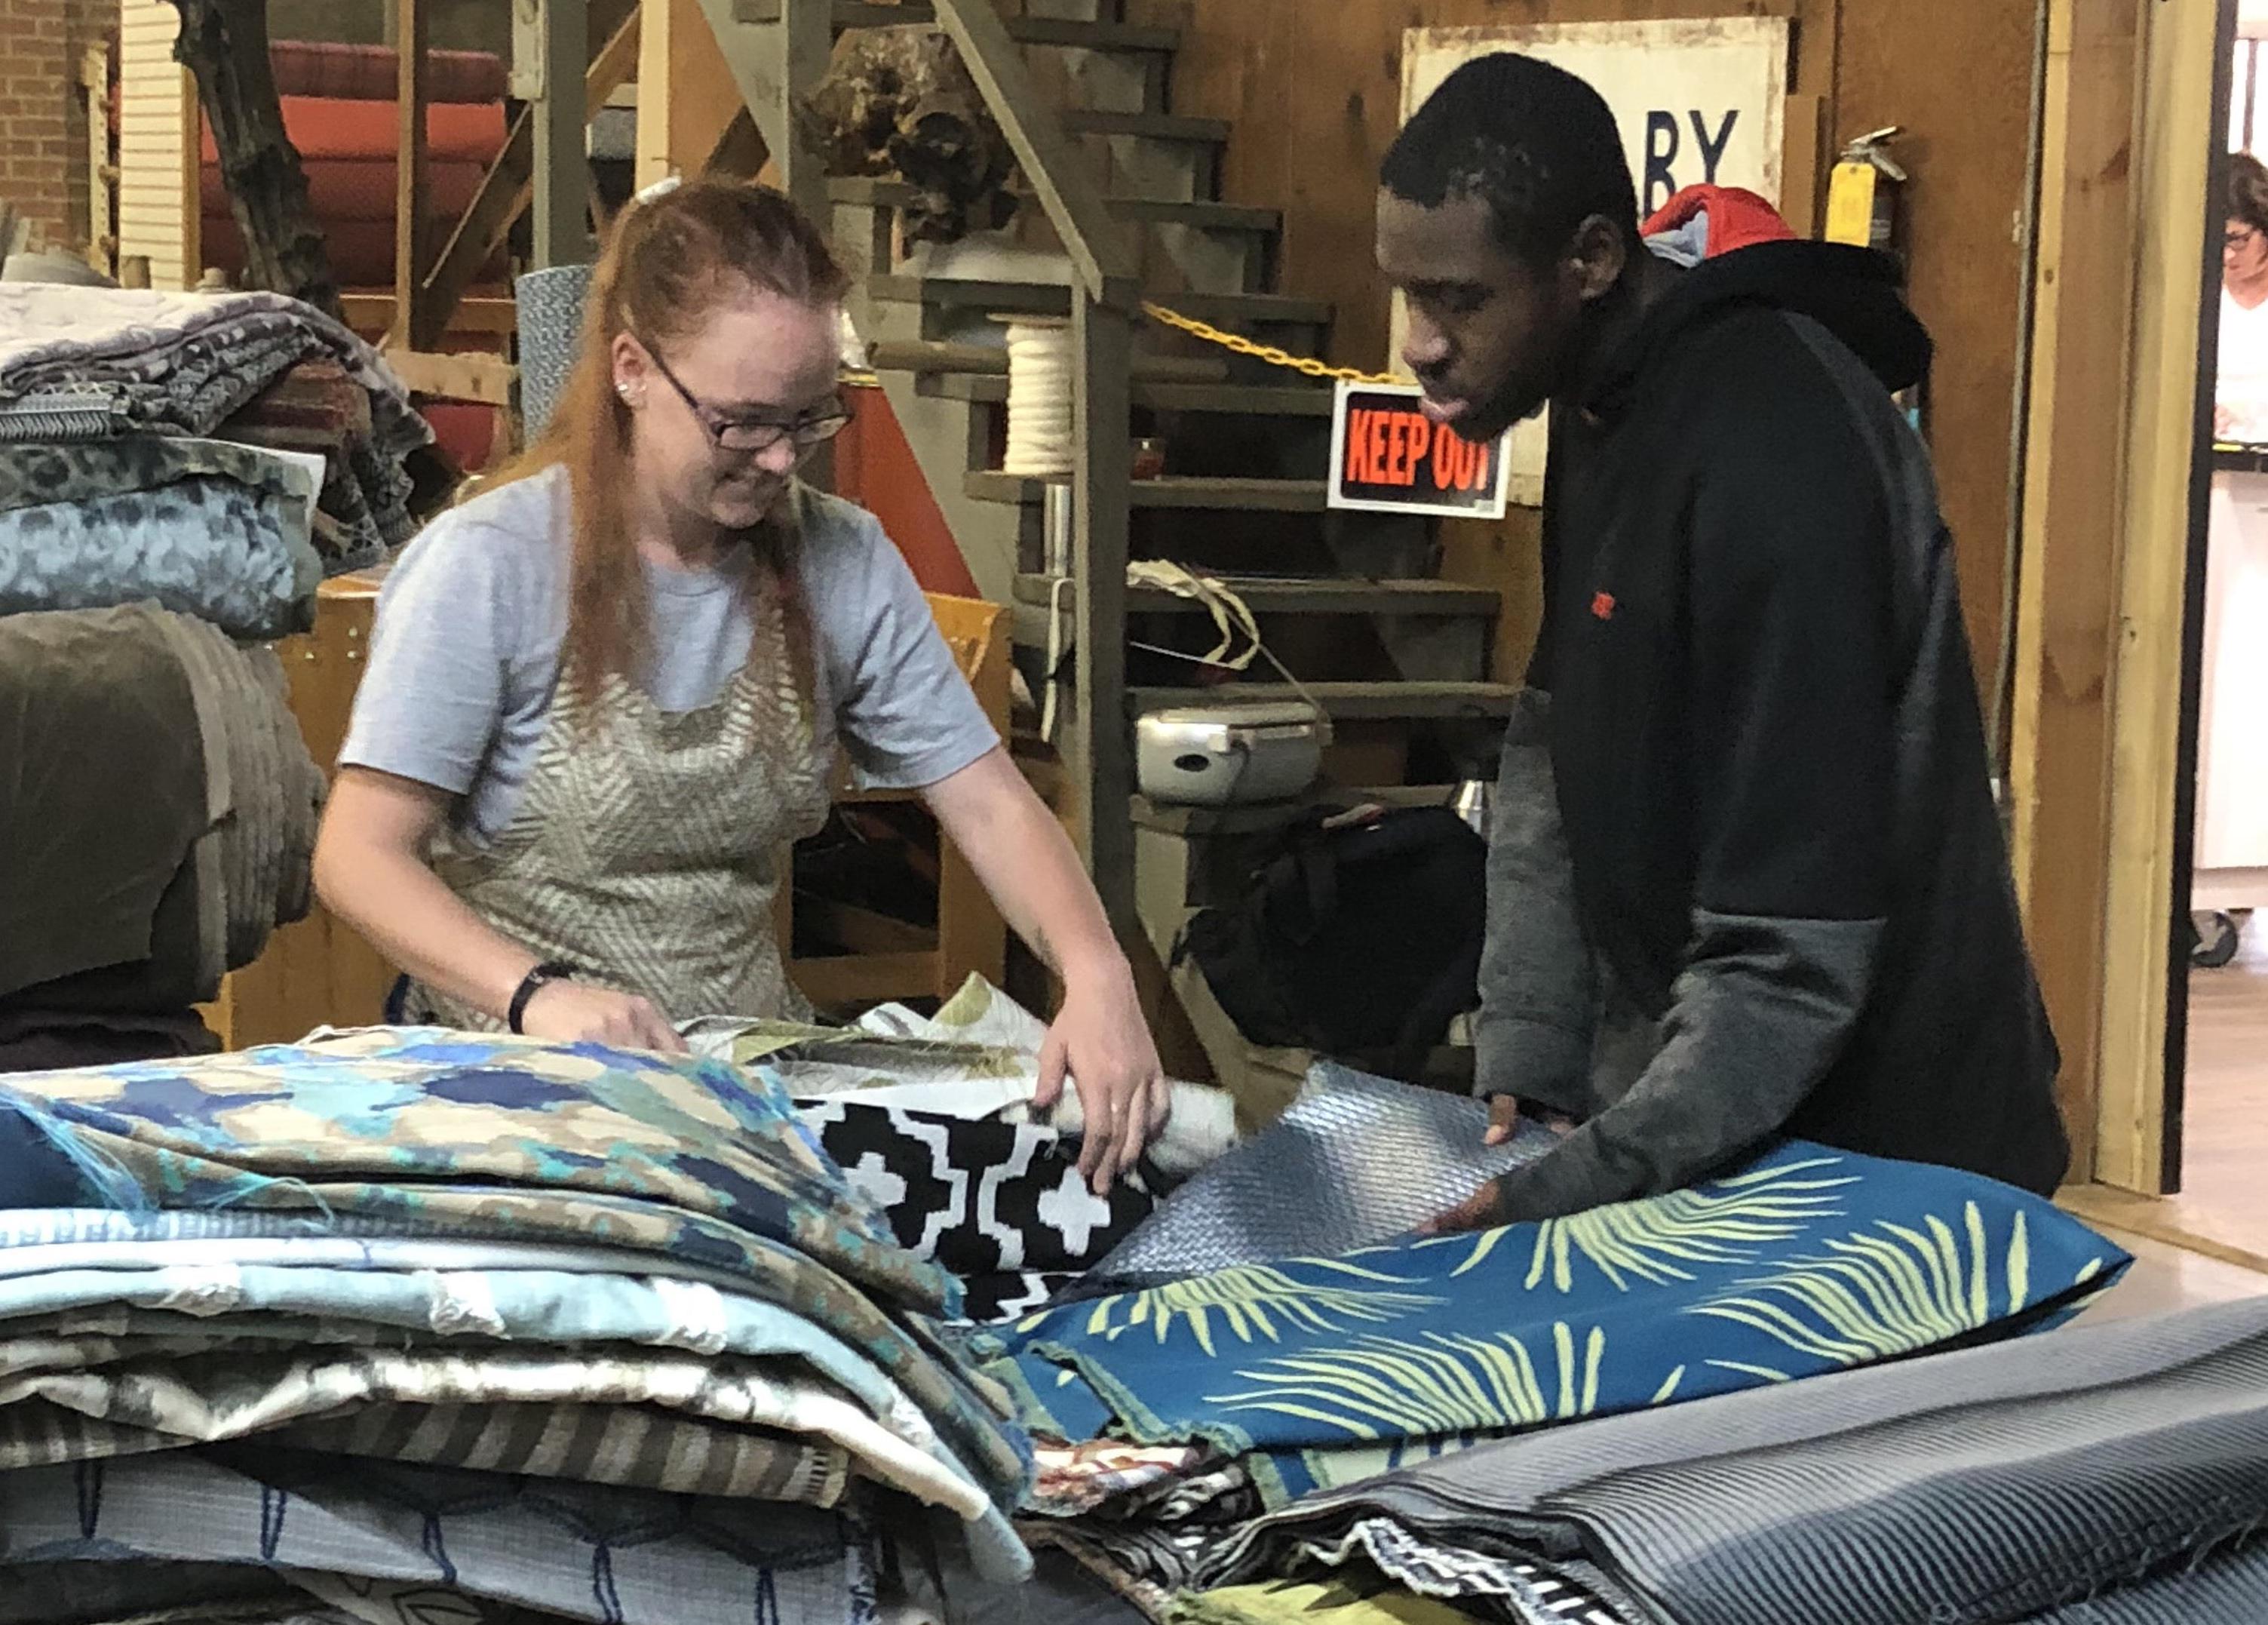 SPECIAL EDUCATION SUCCESS—A student (right) from Cleveland County Schools works with an employee at a fabric company. The North Carolina district’s Future Ready Occupational Course of Study program prepares special needs students for life after high school, with access to on-the-job experiences and related training in soft and hard skills.